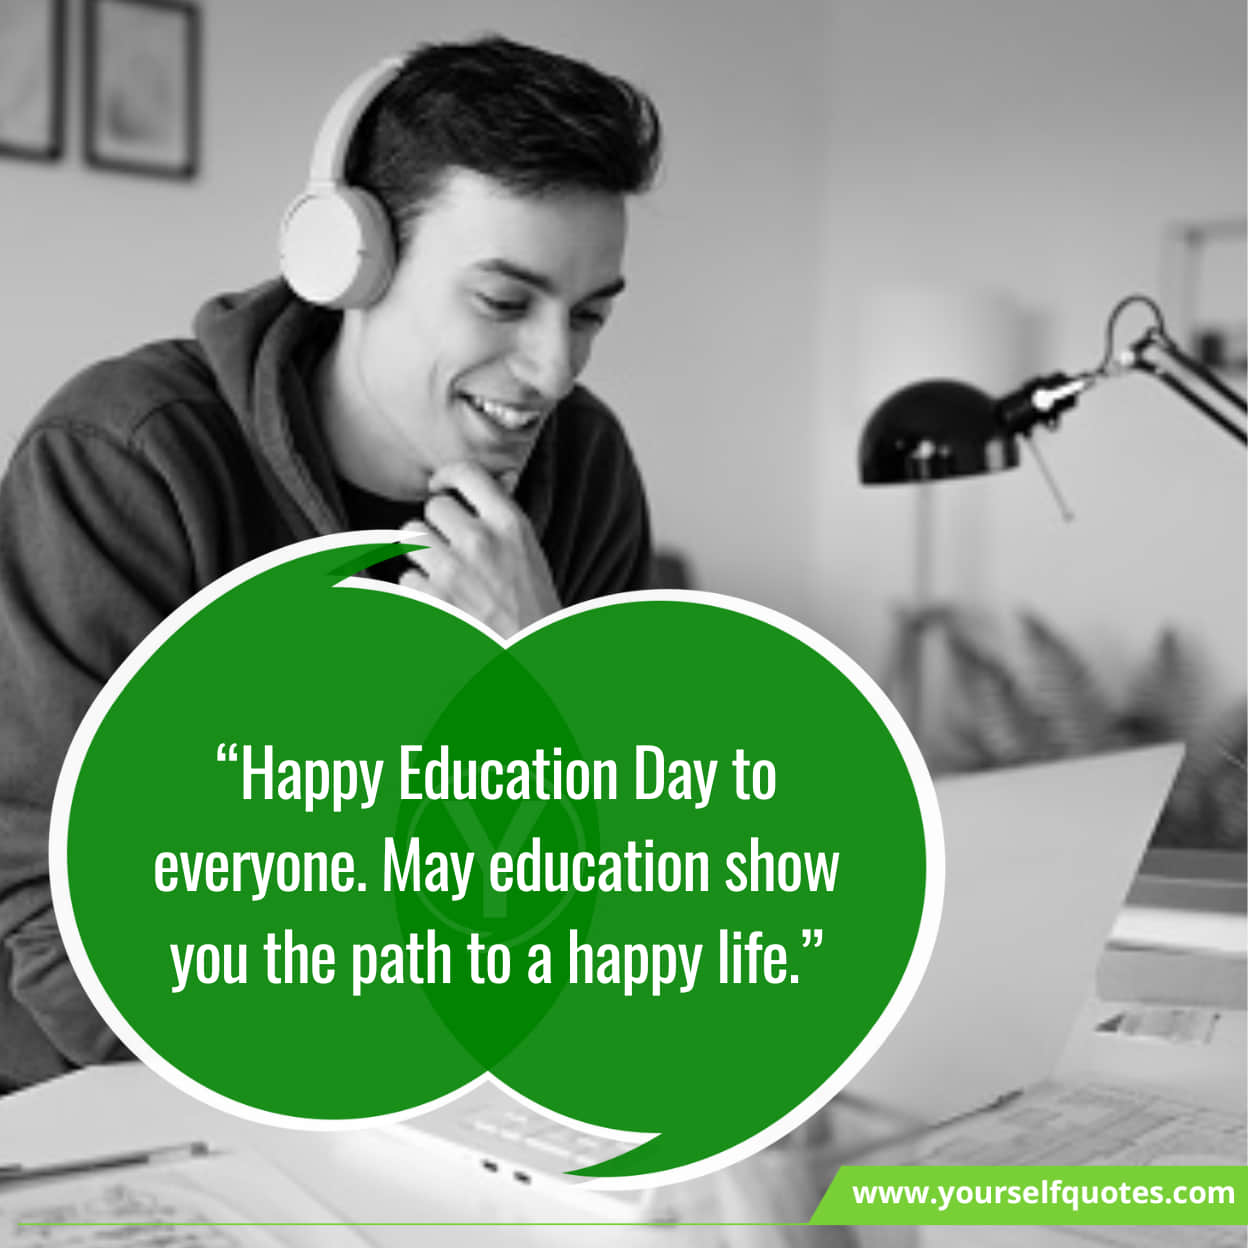 Latest Best Wishes On Education Day